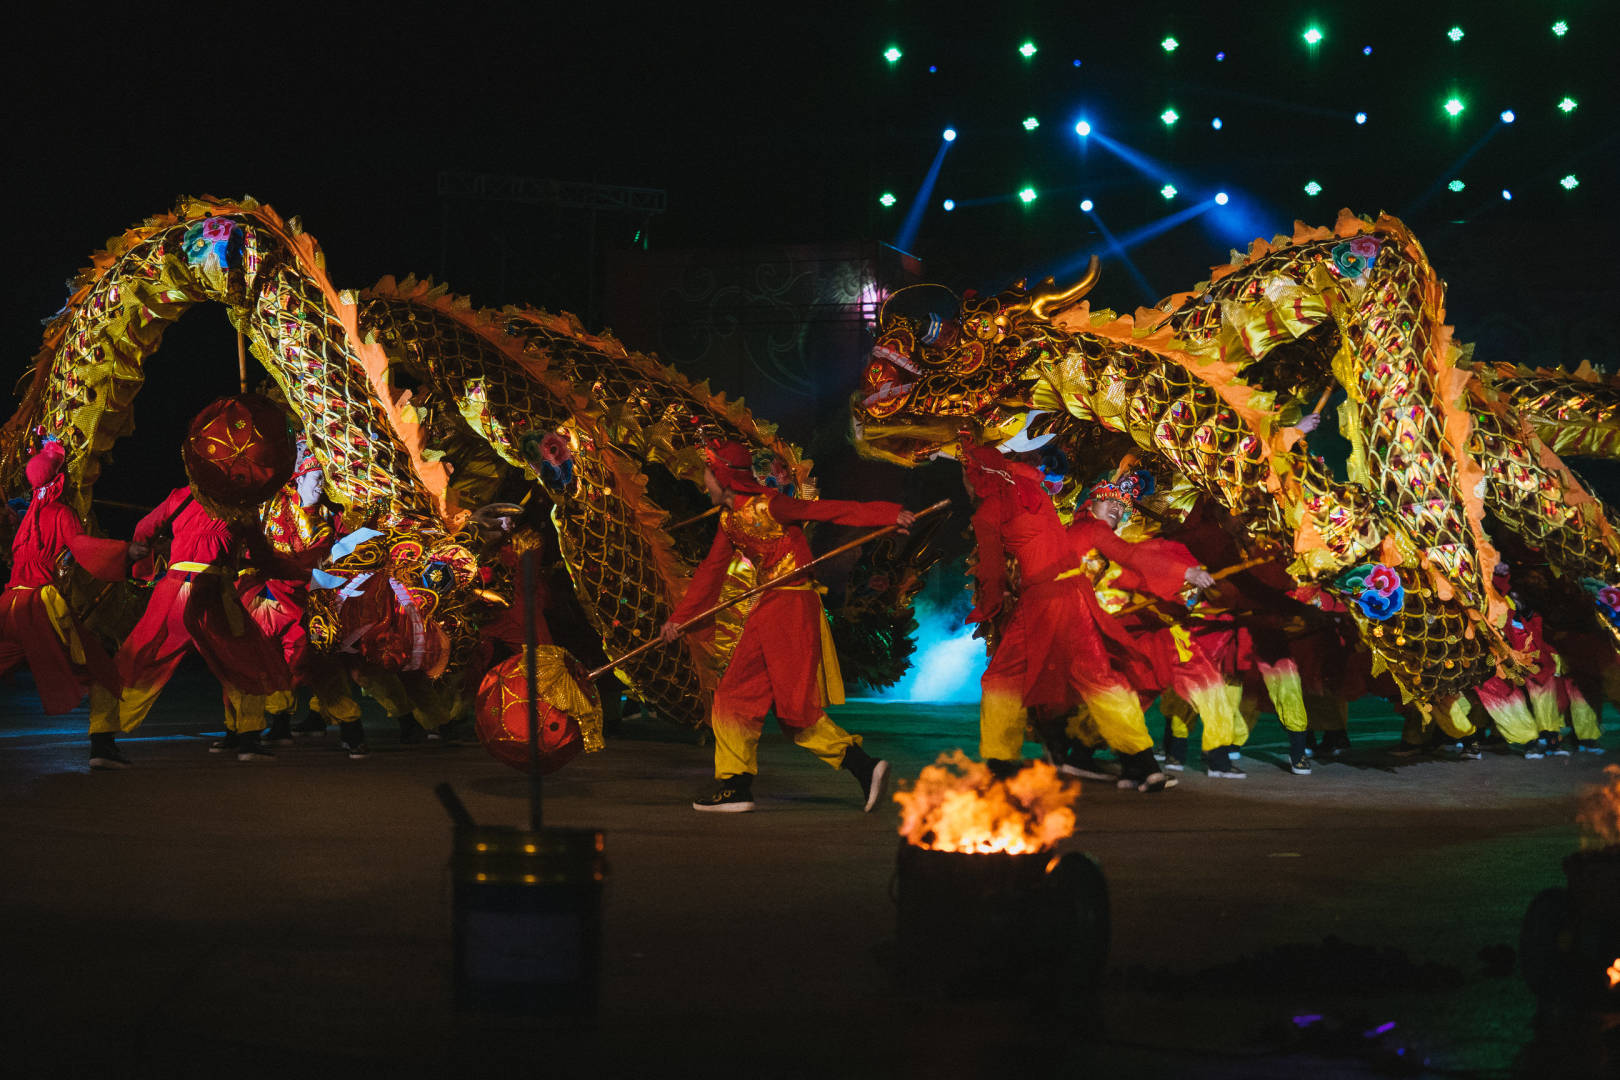 Two dragons played with the pearl at Tongliang Dragon Lights Art Festival. Photo by Martin S. (Max).